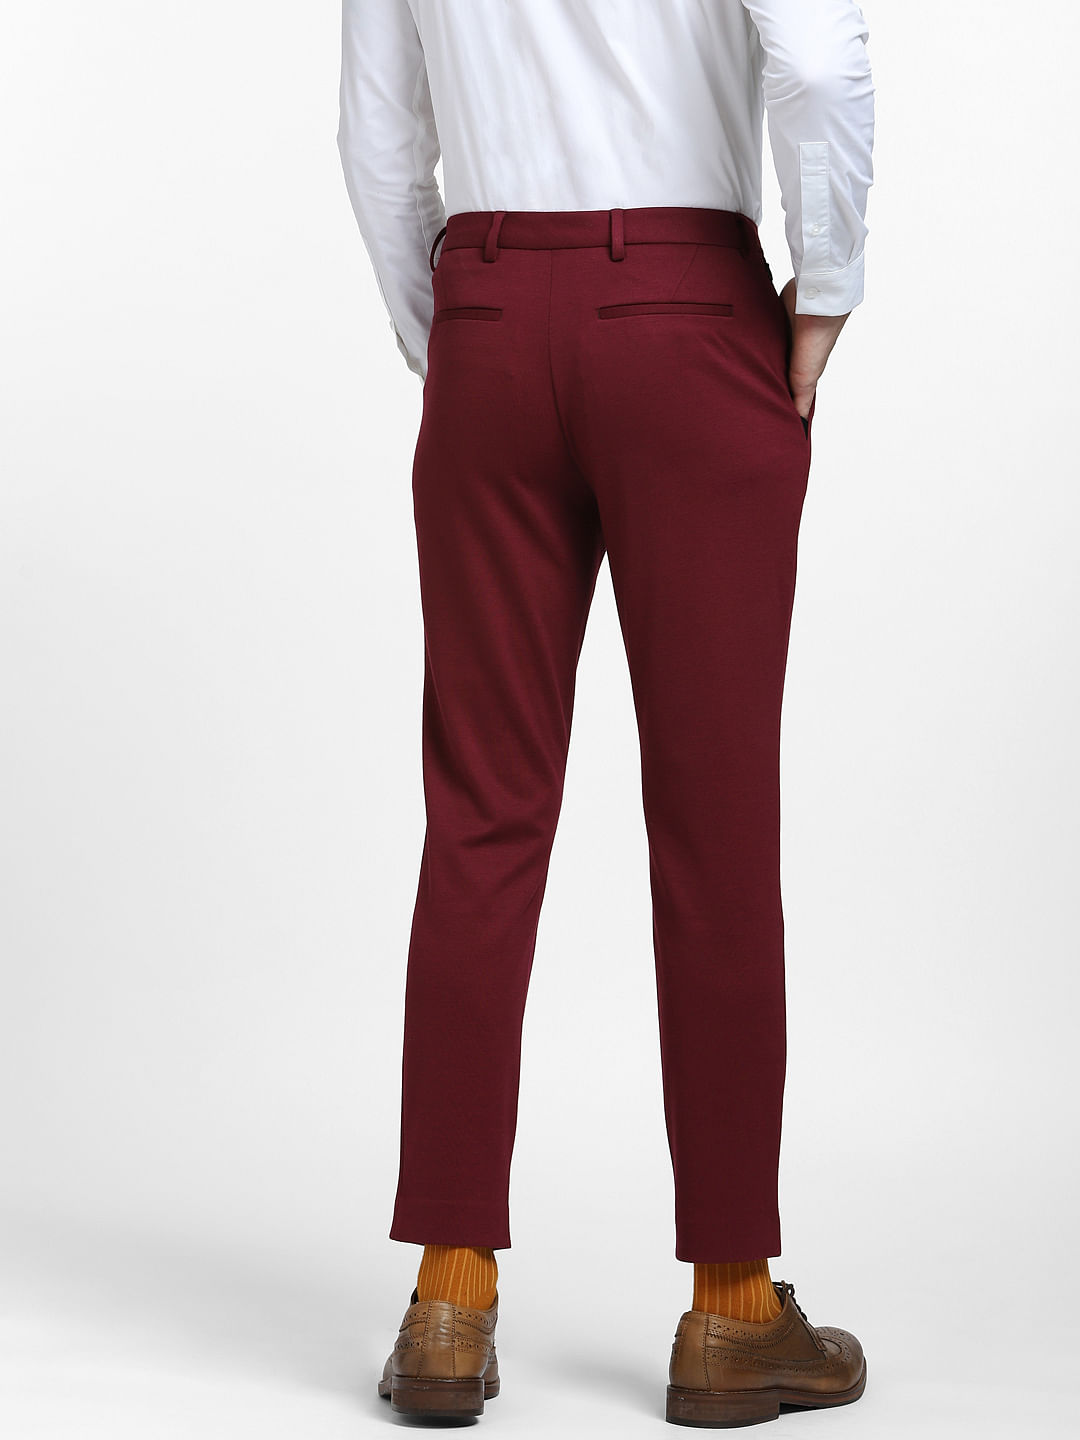 Buy Regular Fit Men Trousers White and Maroon Combo of 2 Polyester Blend  for Best Price, Reviews, Free Shipping